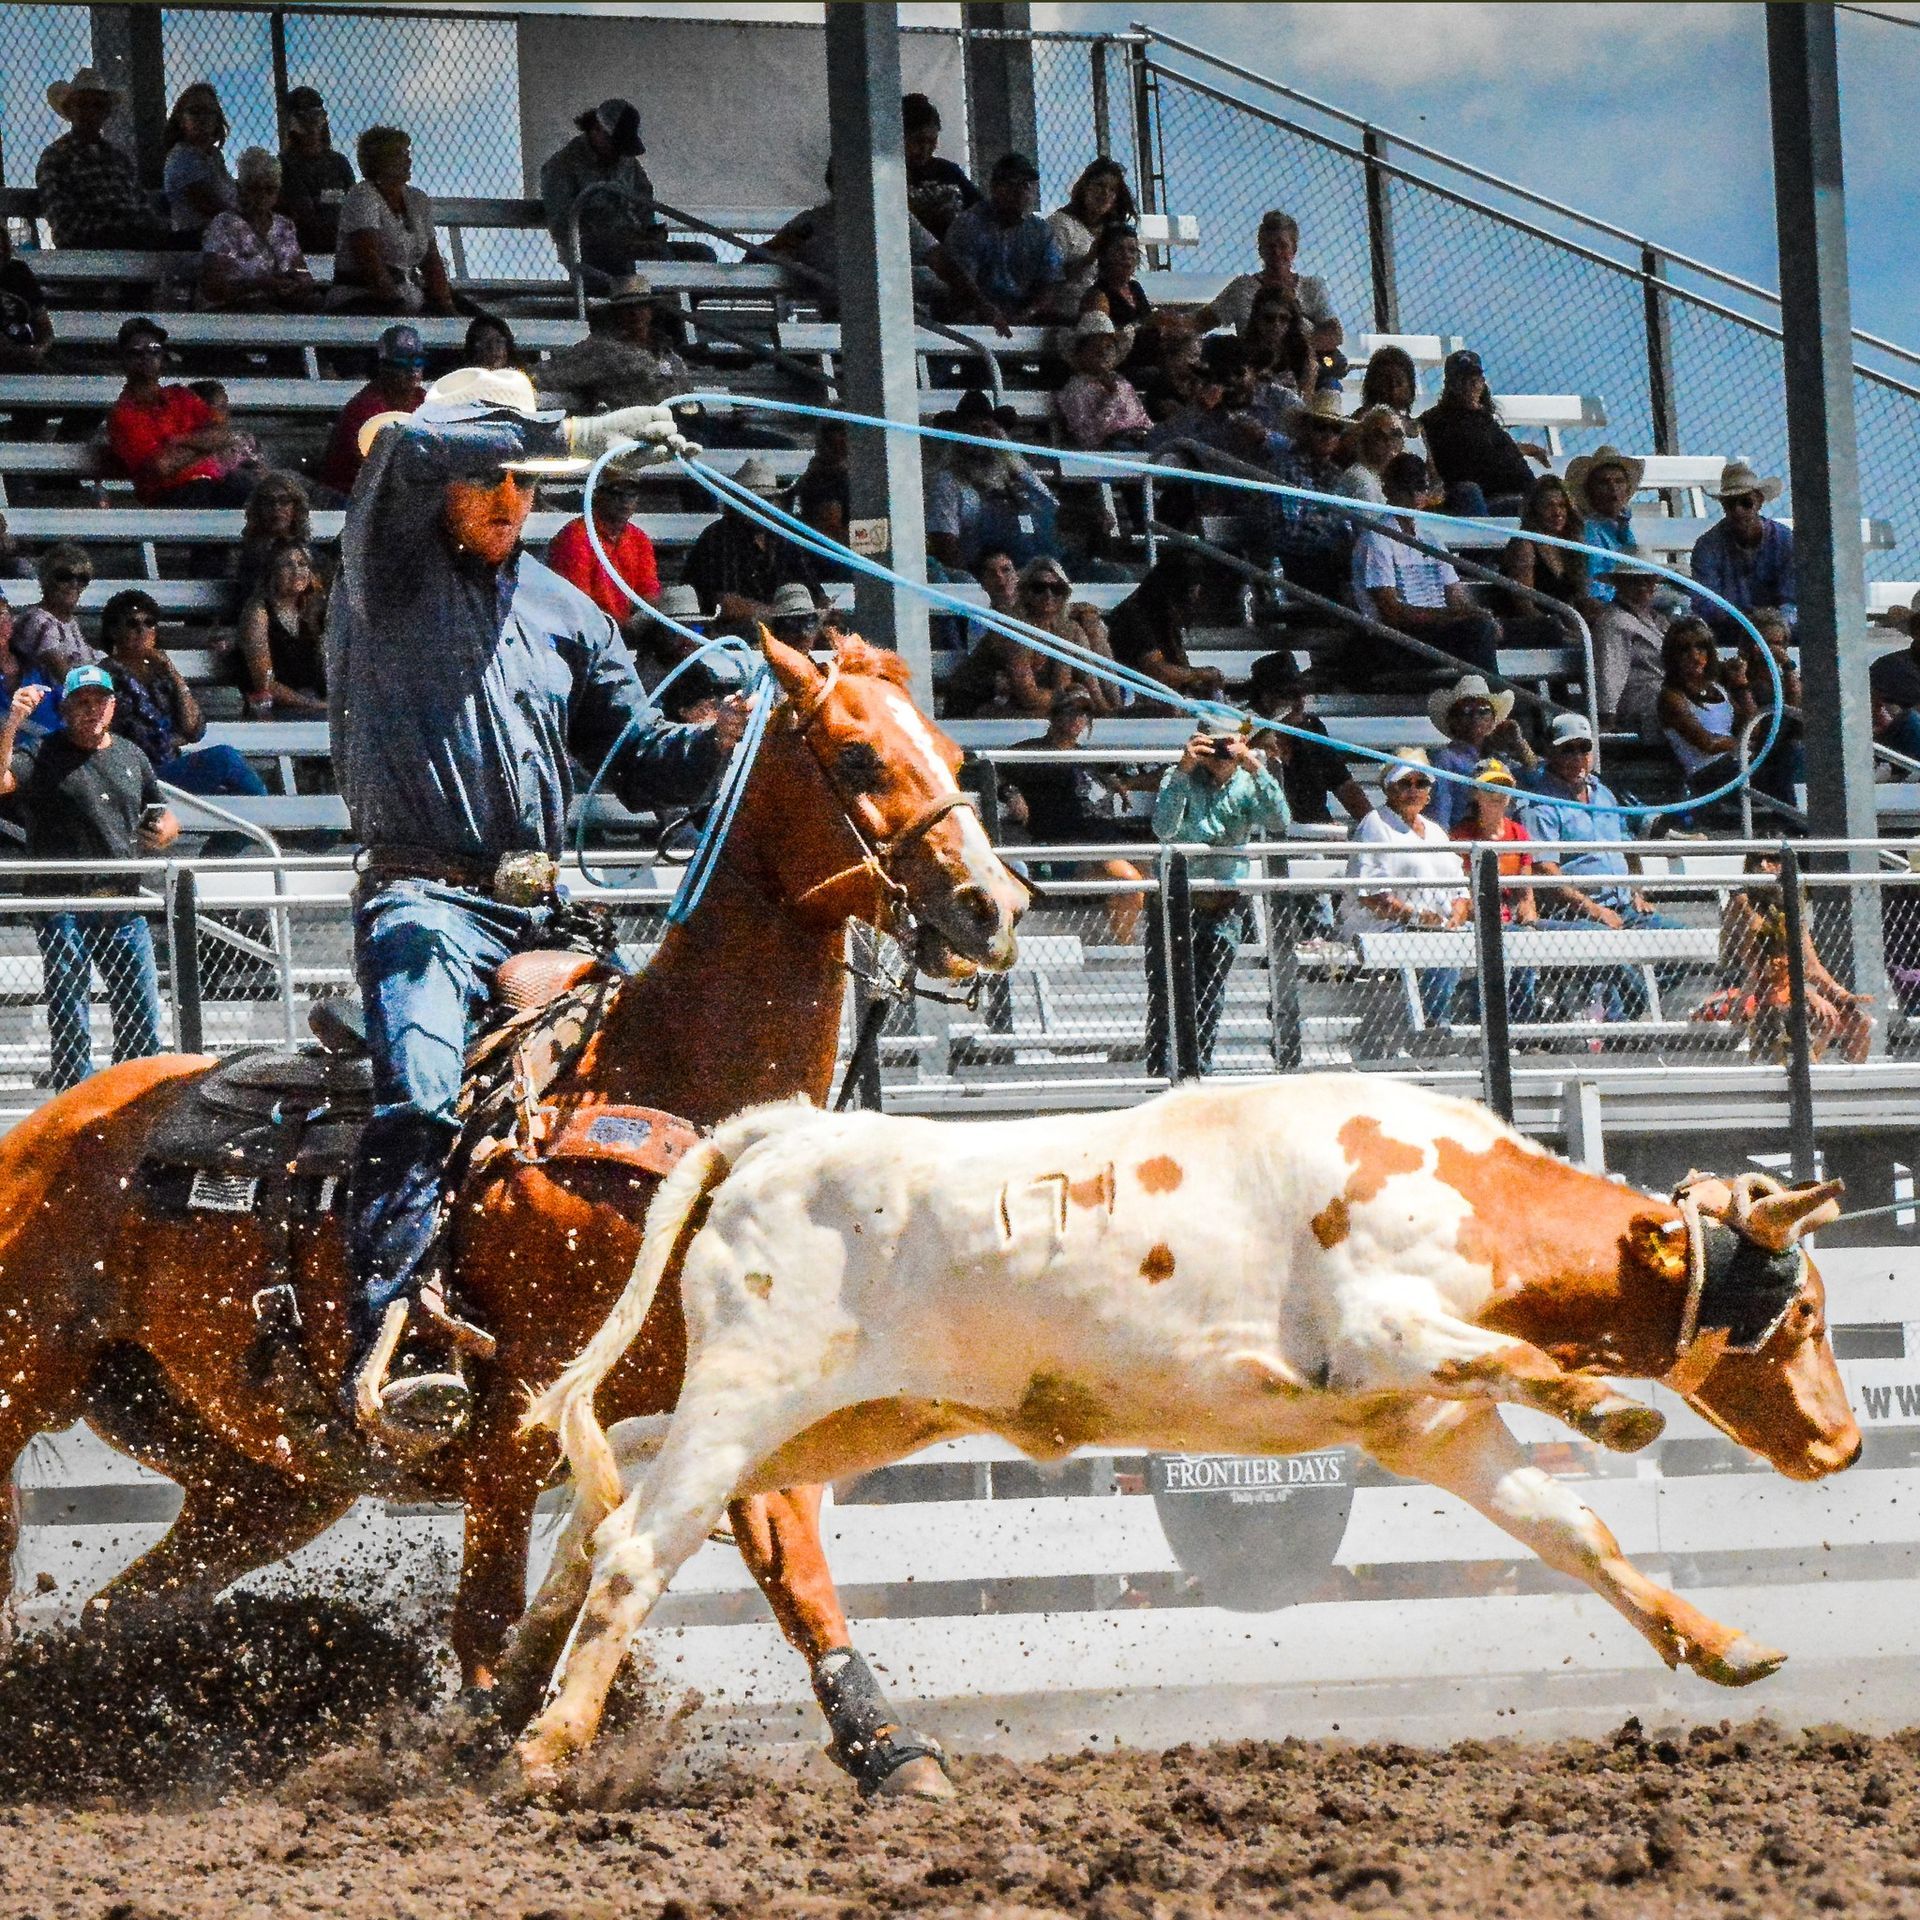 
World's Largest Outdoor Rodeo, world record in Cheyenne, Wyoming